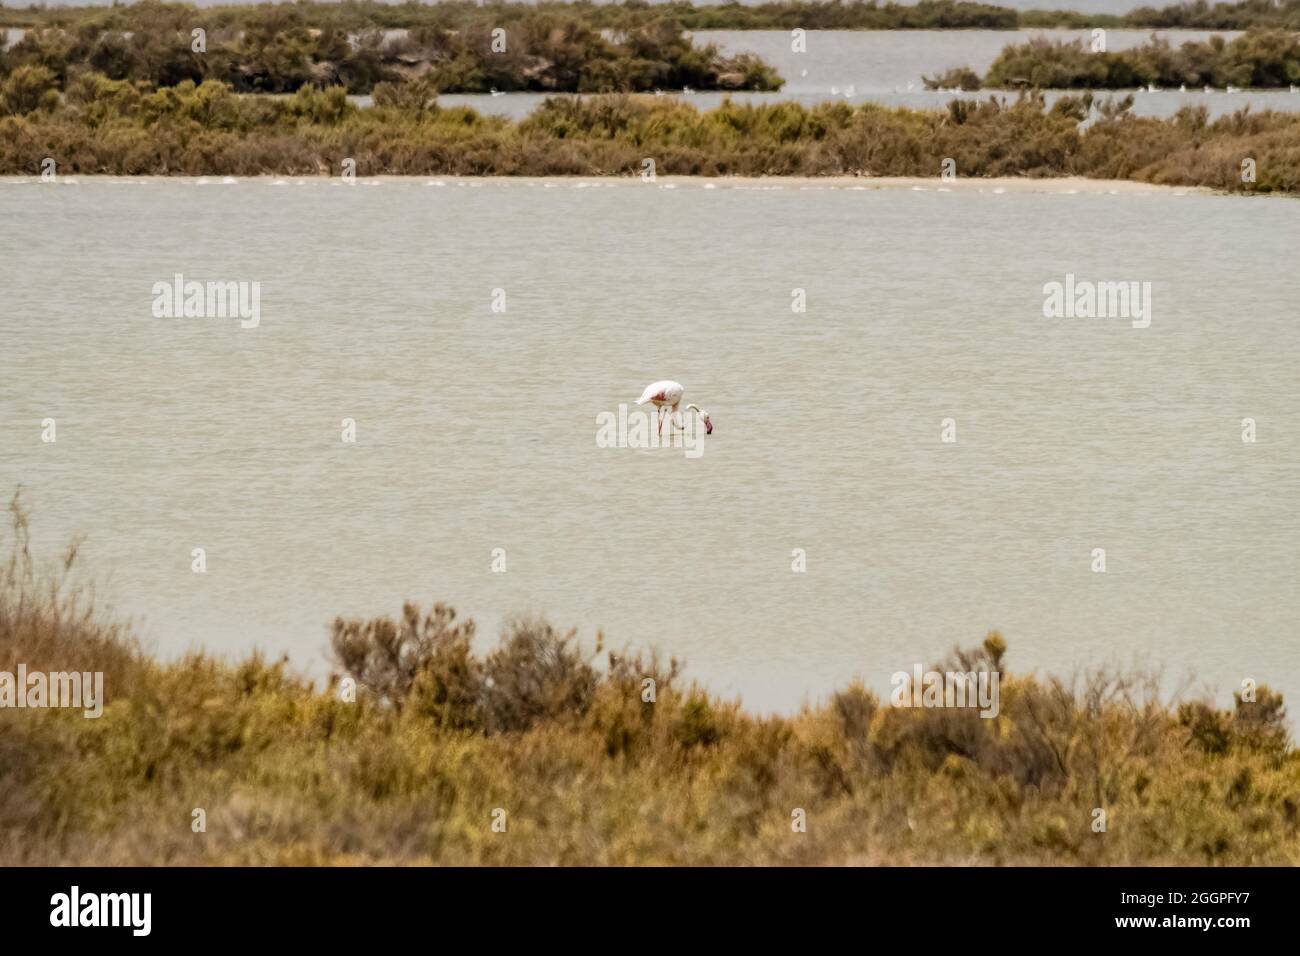 A beautiful specimen of flamingo while it feeds in a pond, Sardinia, Italy. Stock Photo